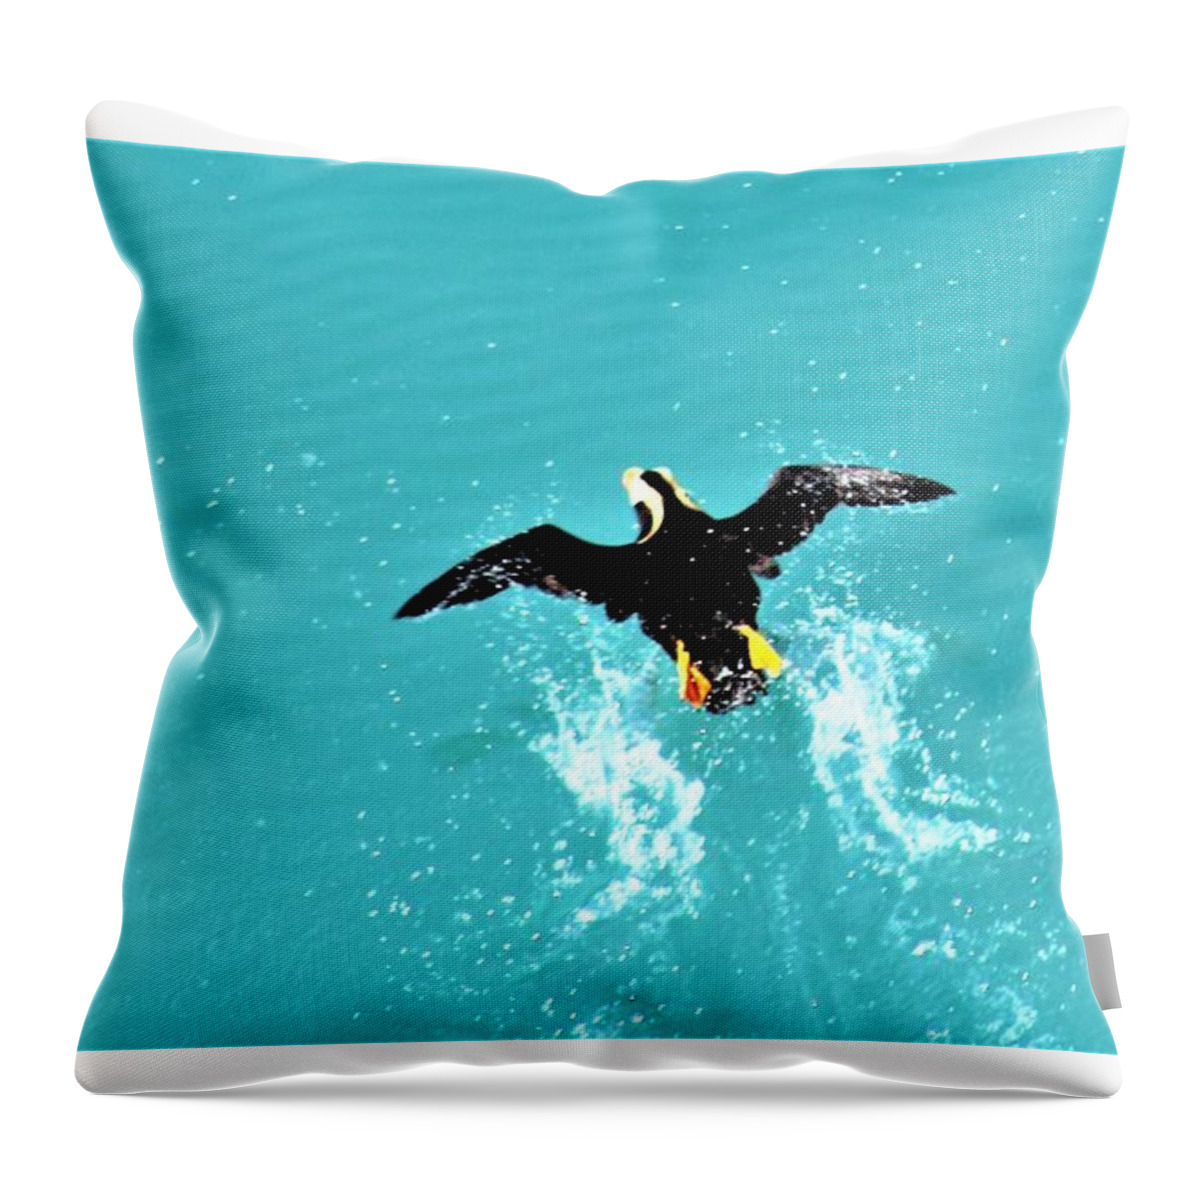 Puffin Throw Pillow featuring the photograph Puffin Takeoff by FD Graham